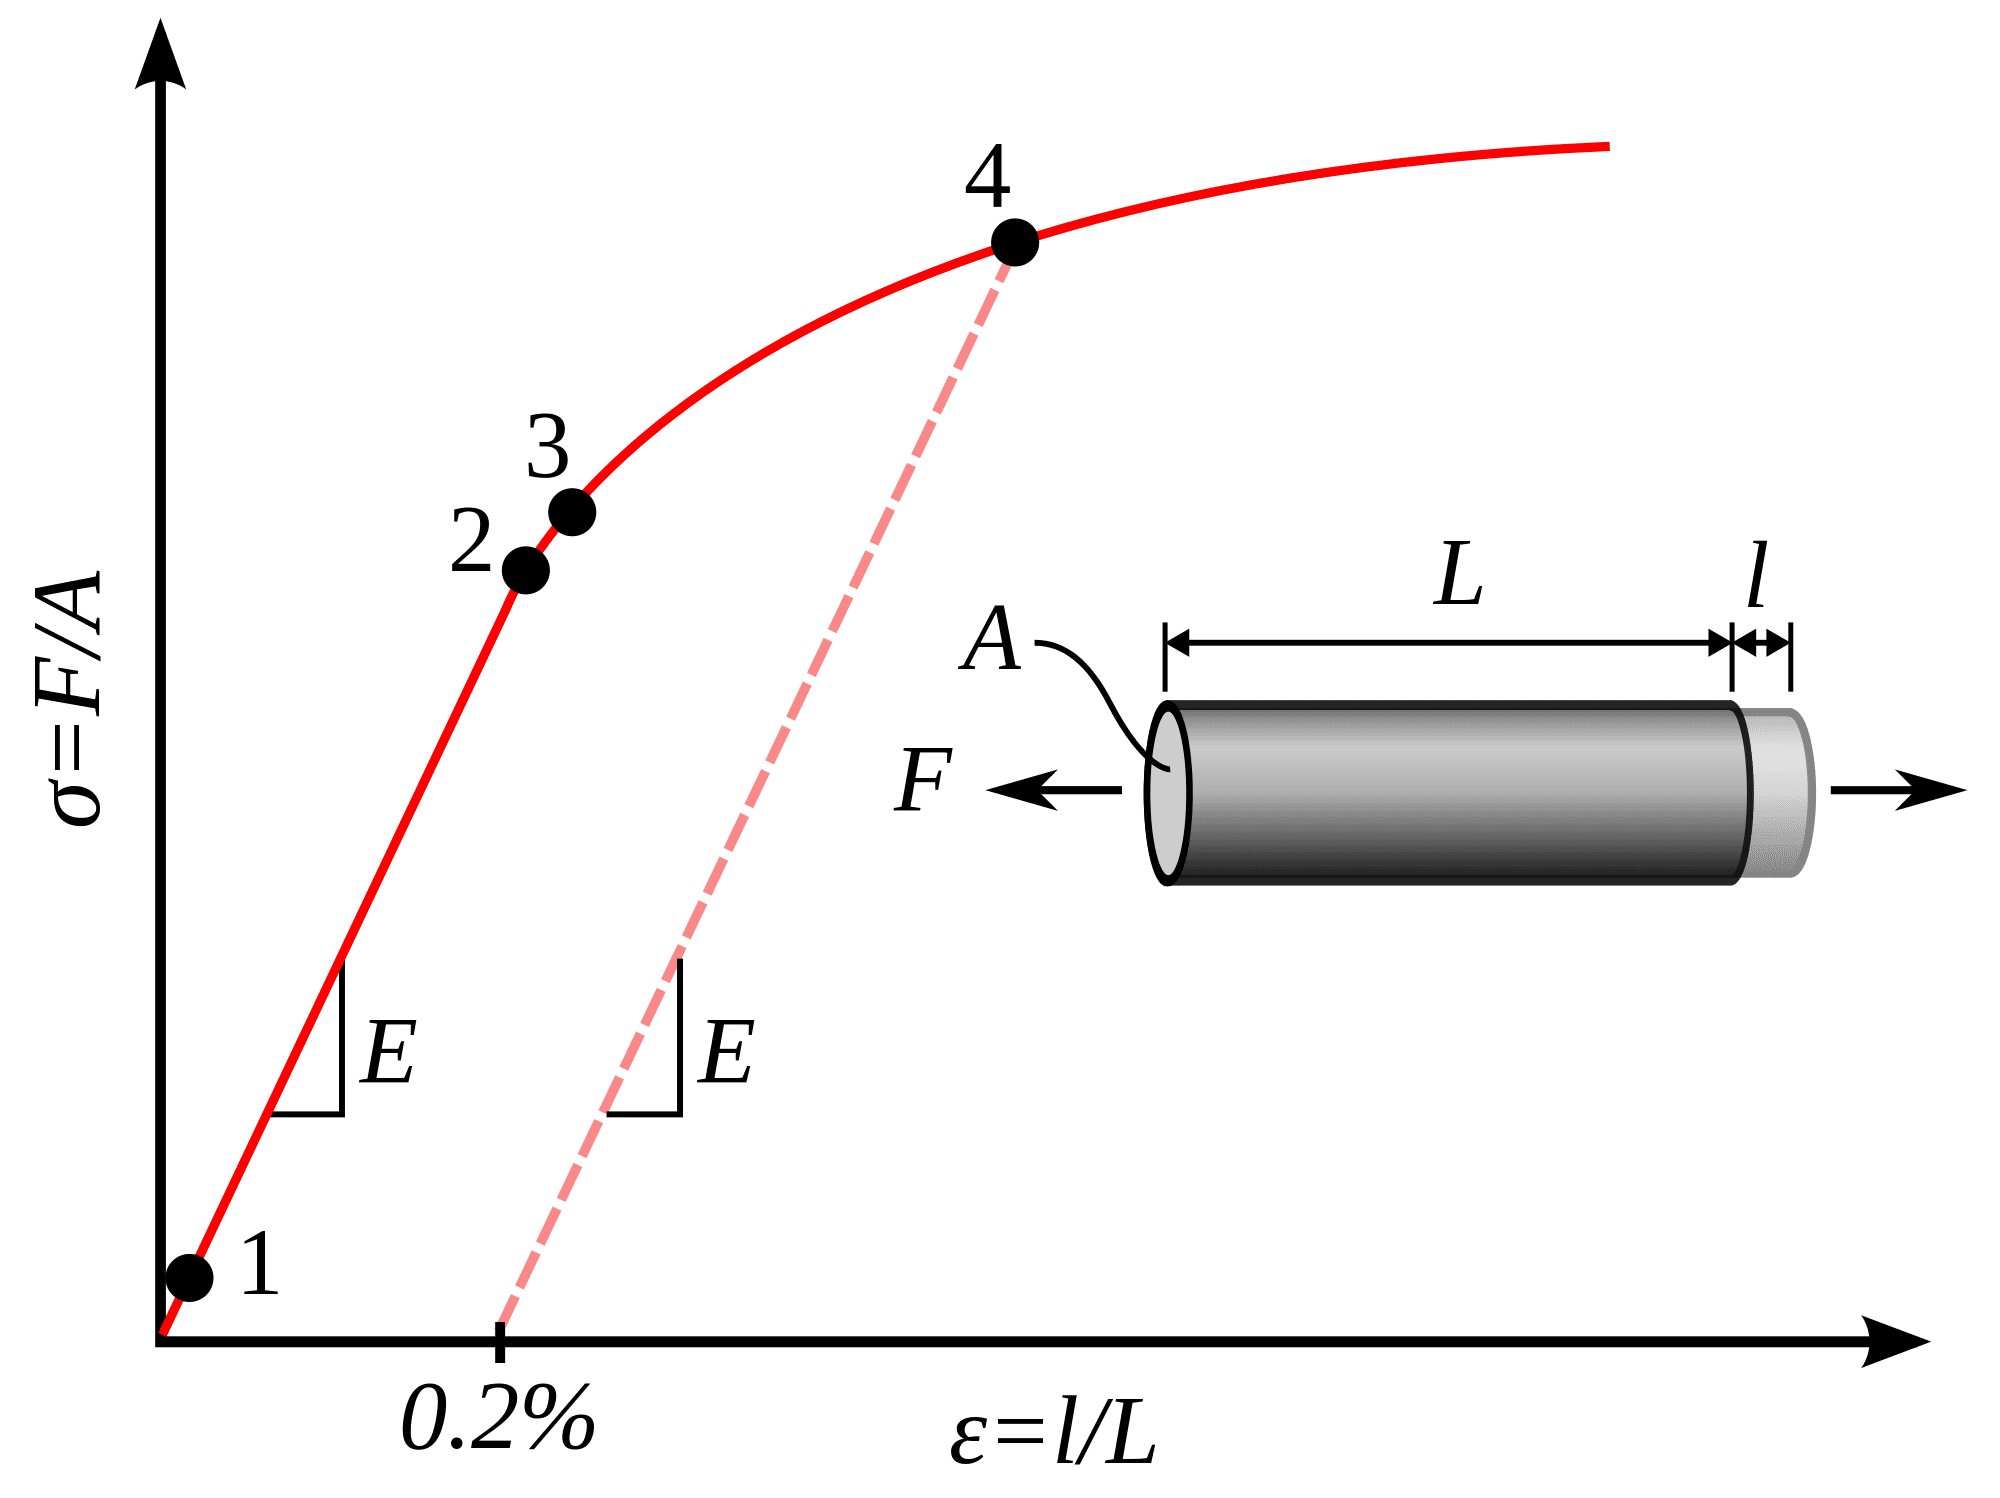 Typical stress strain curve obtained during uniaxial tensile testing of ductile material